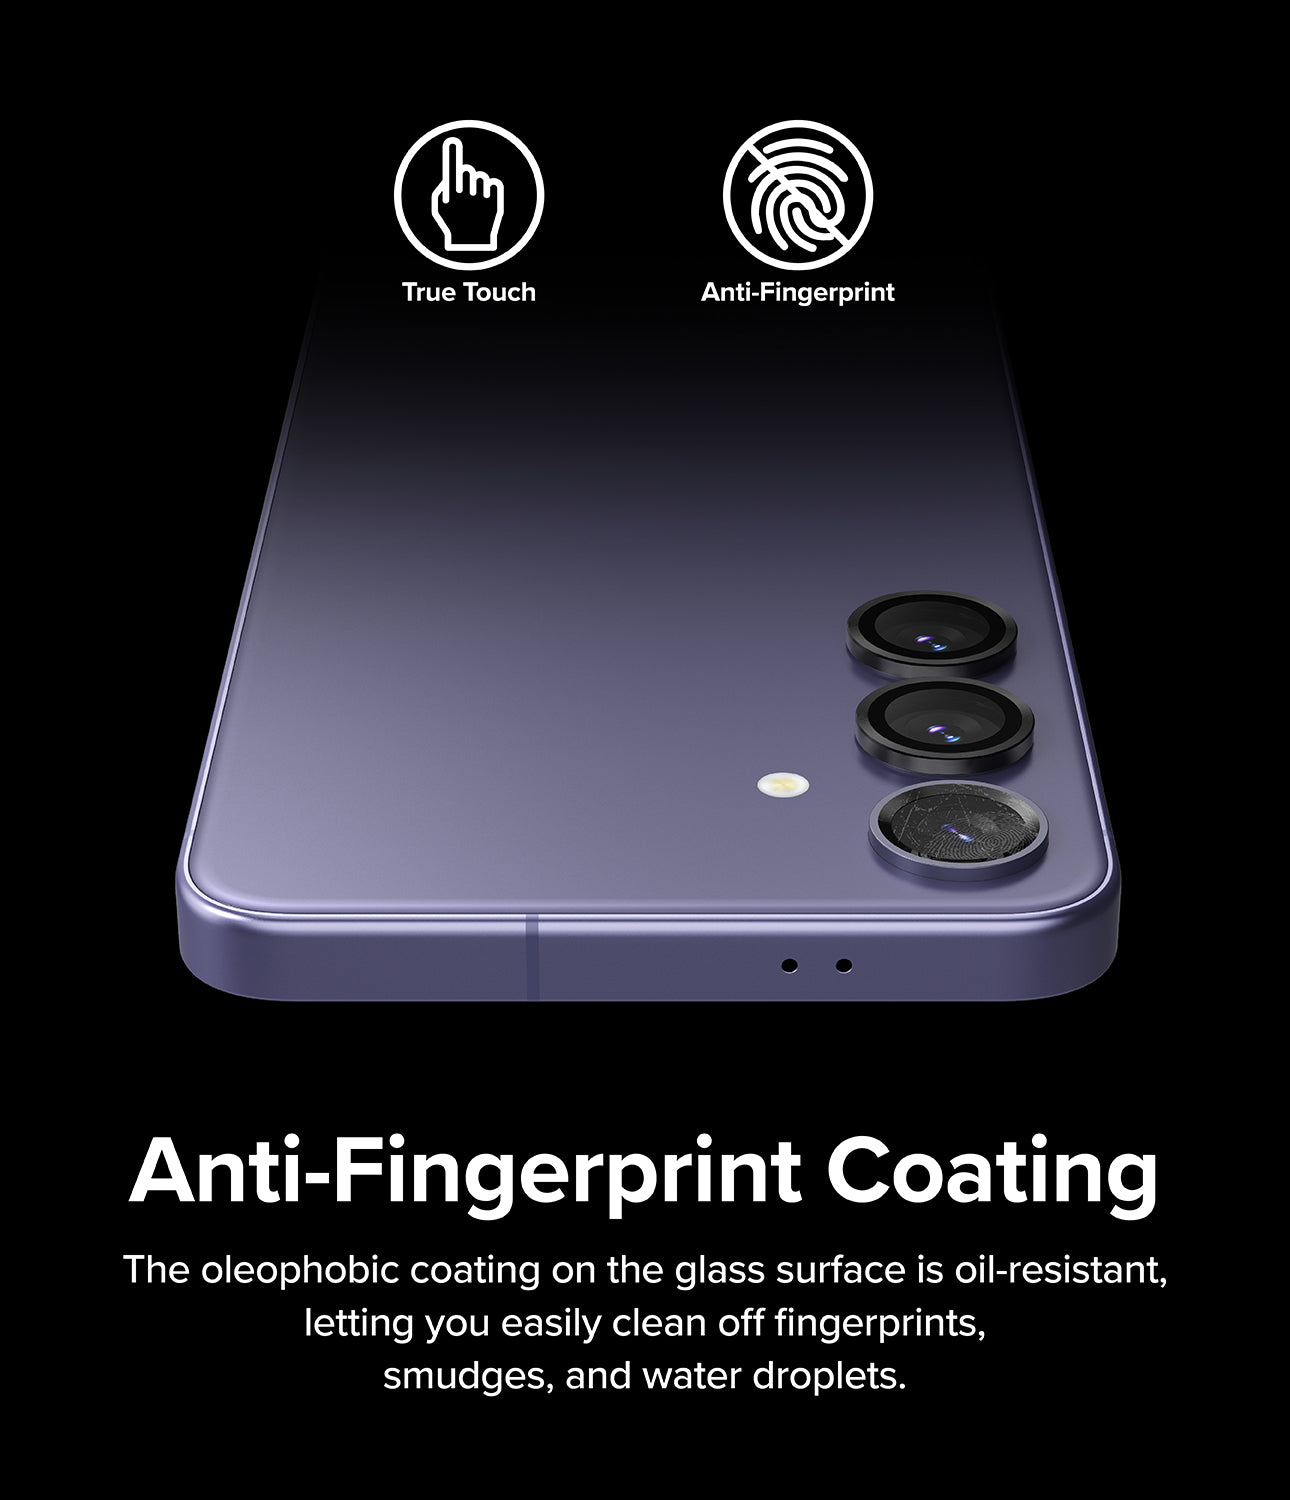 Galaxy S24 Plus Lens Protector | Camera Lens Frame Glass - Anti-Fingerprint Coating. The oleophobic coating on the glass surface is oil-resistant, letting you easily clean off fingerprints, smudges and water droplets.